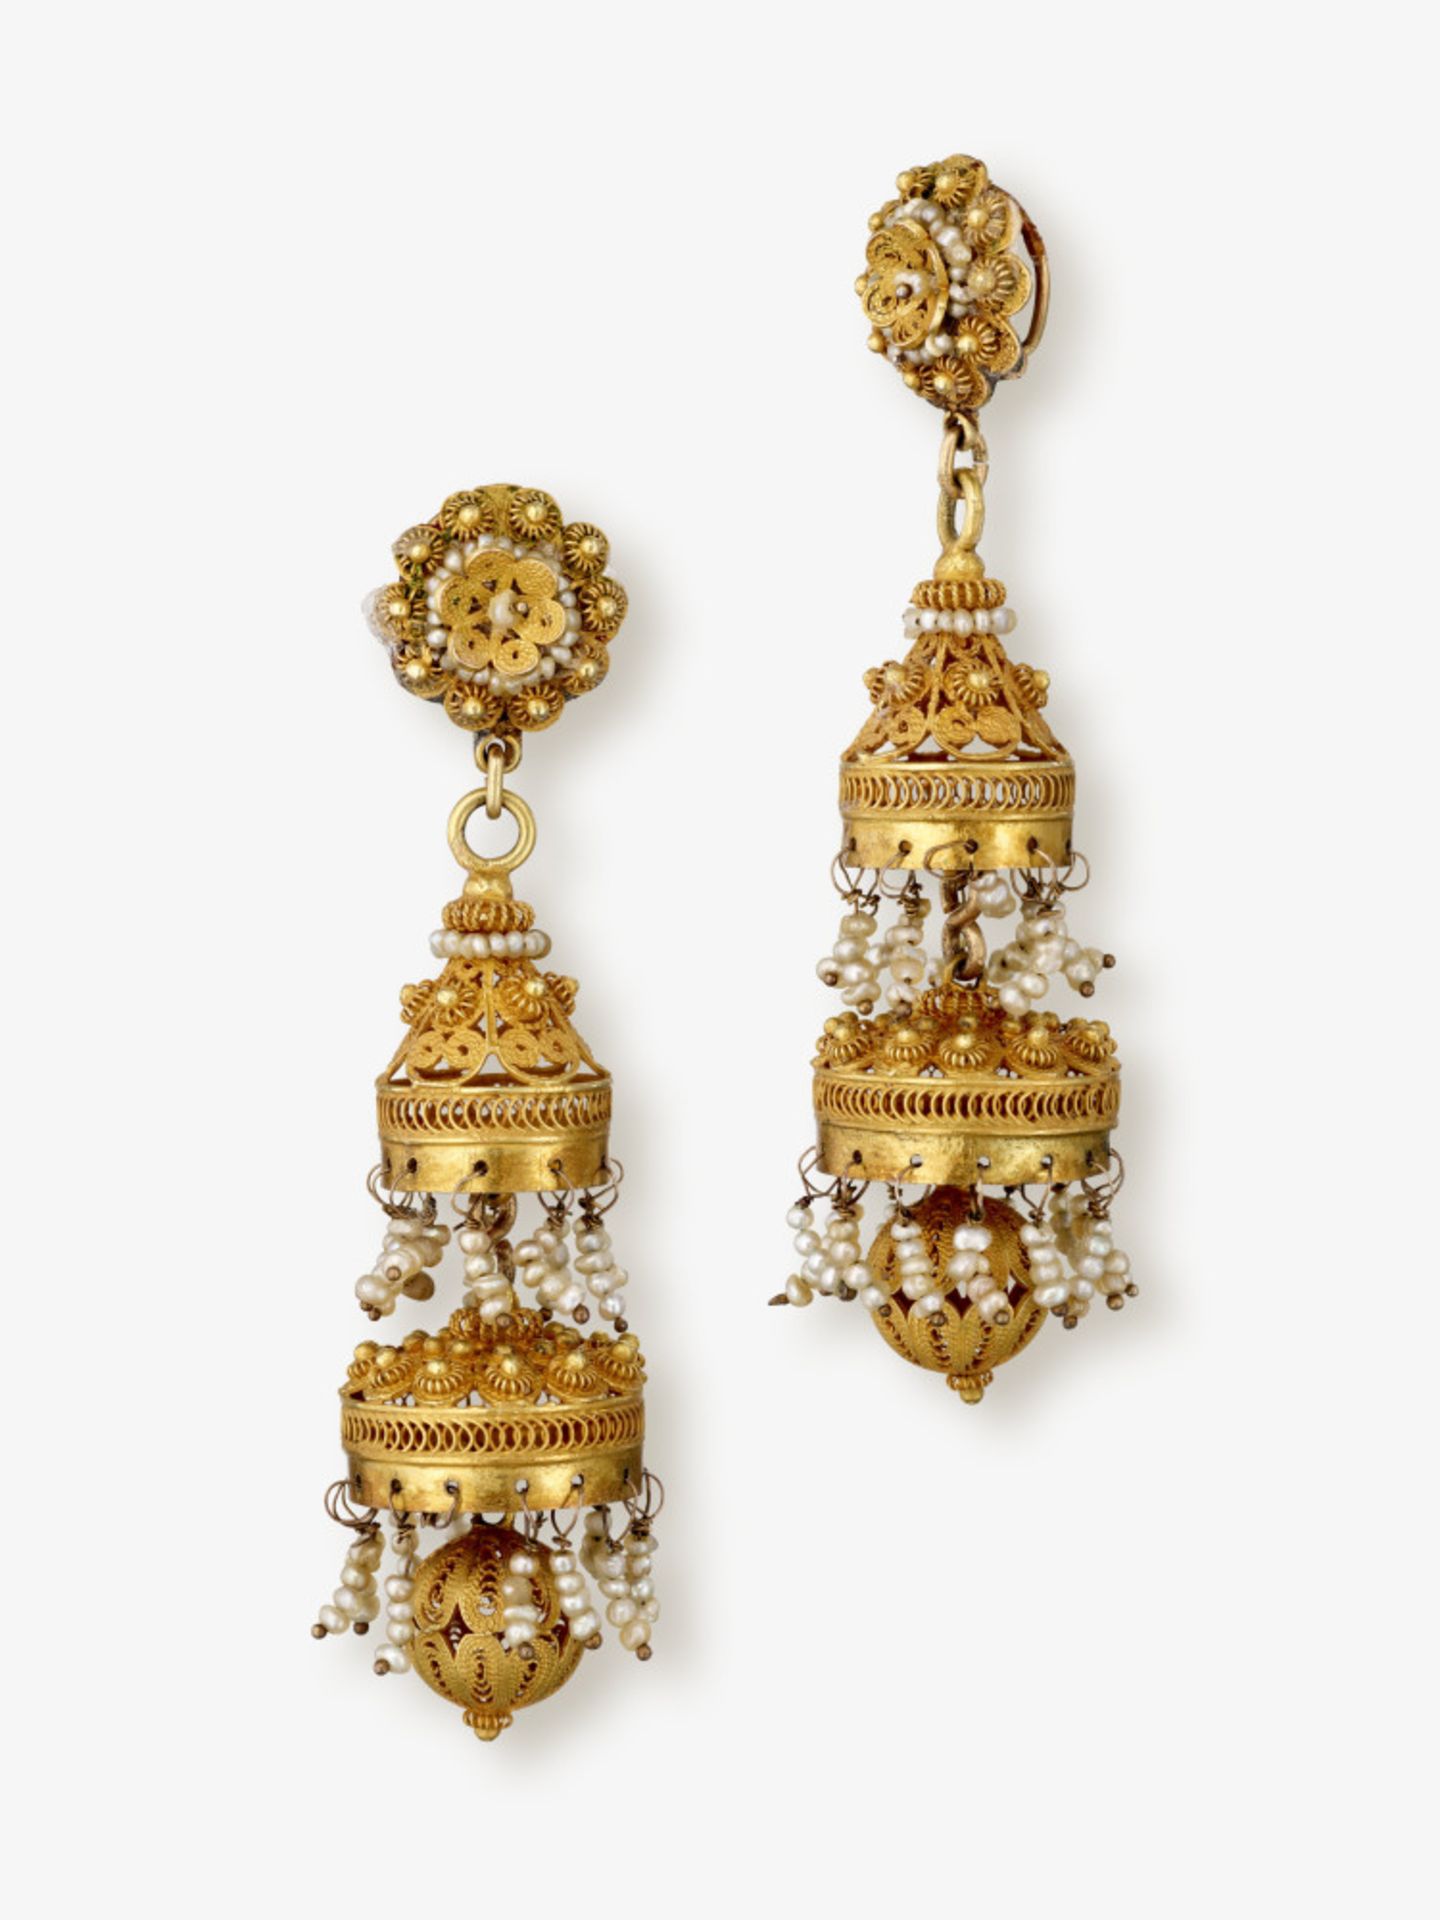 A pair of drop earrings with seed pearls - Circa 1870